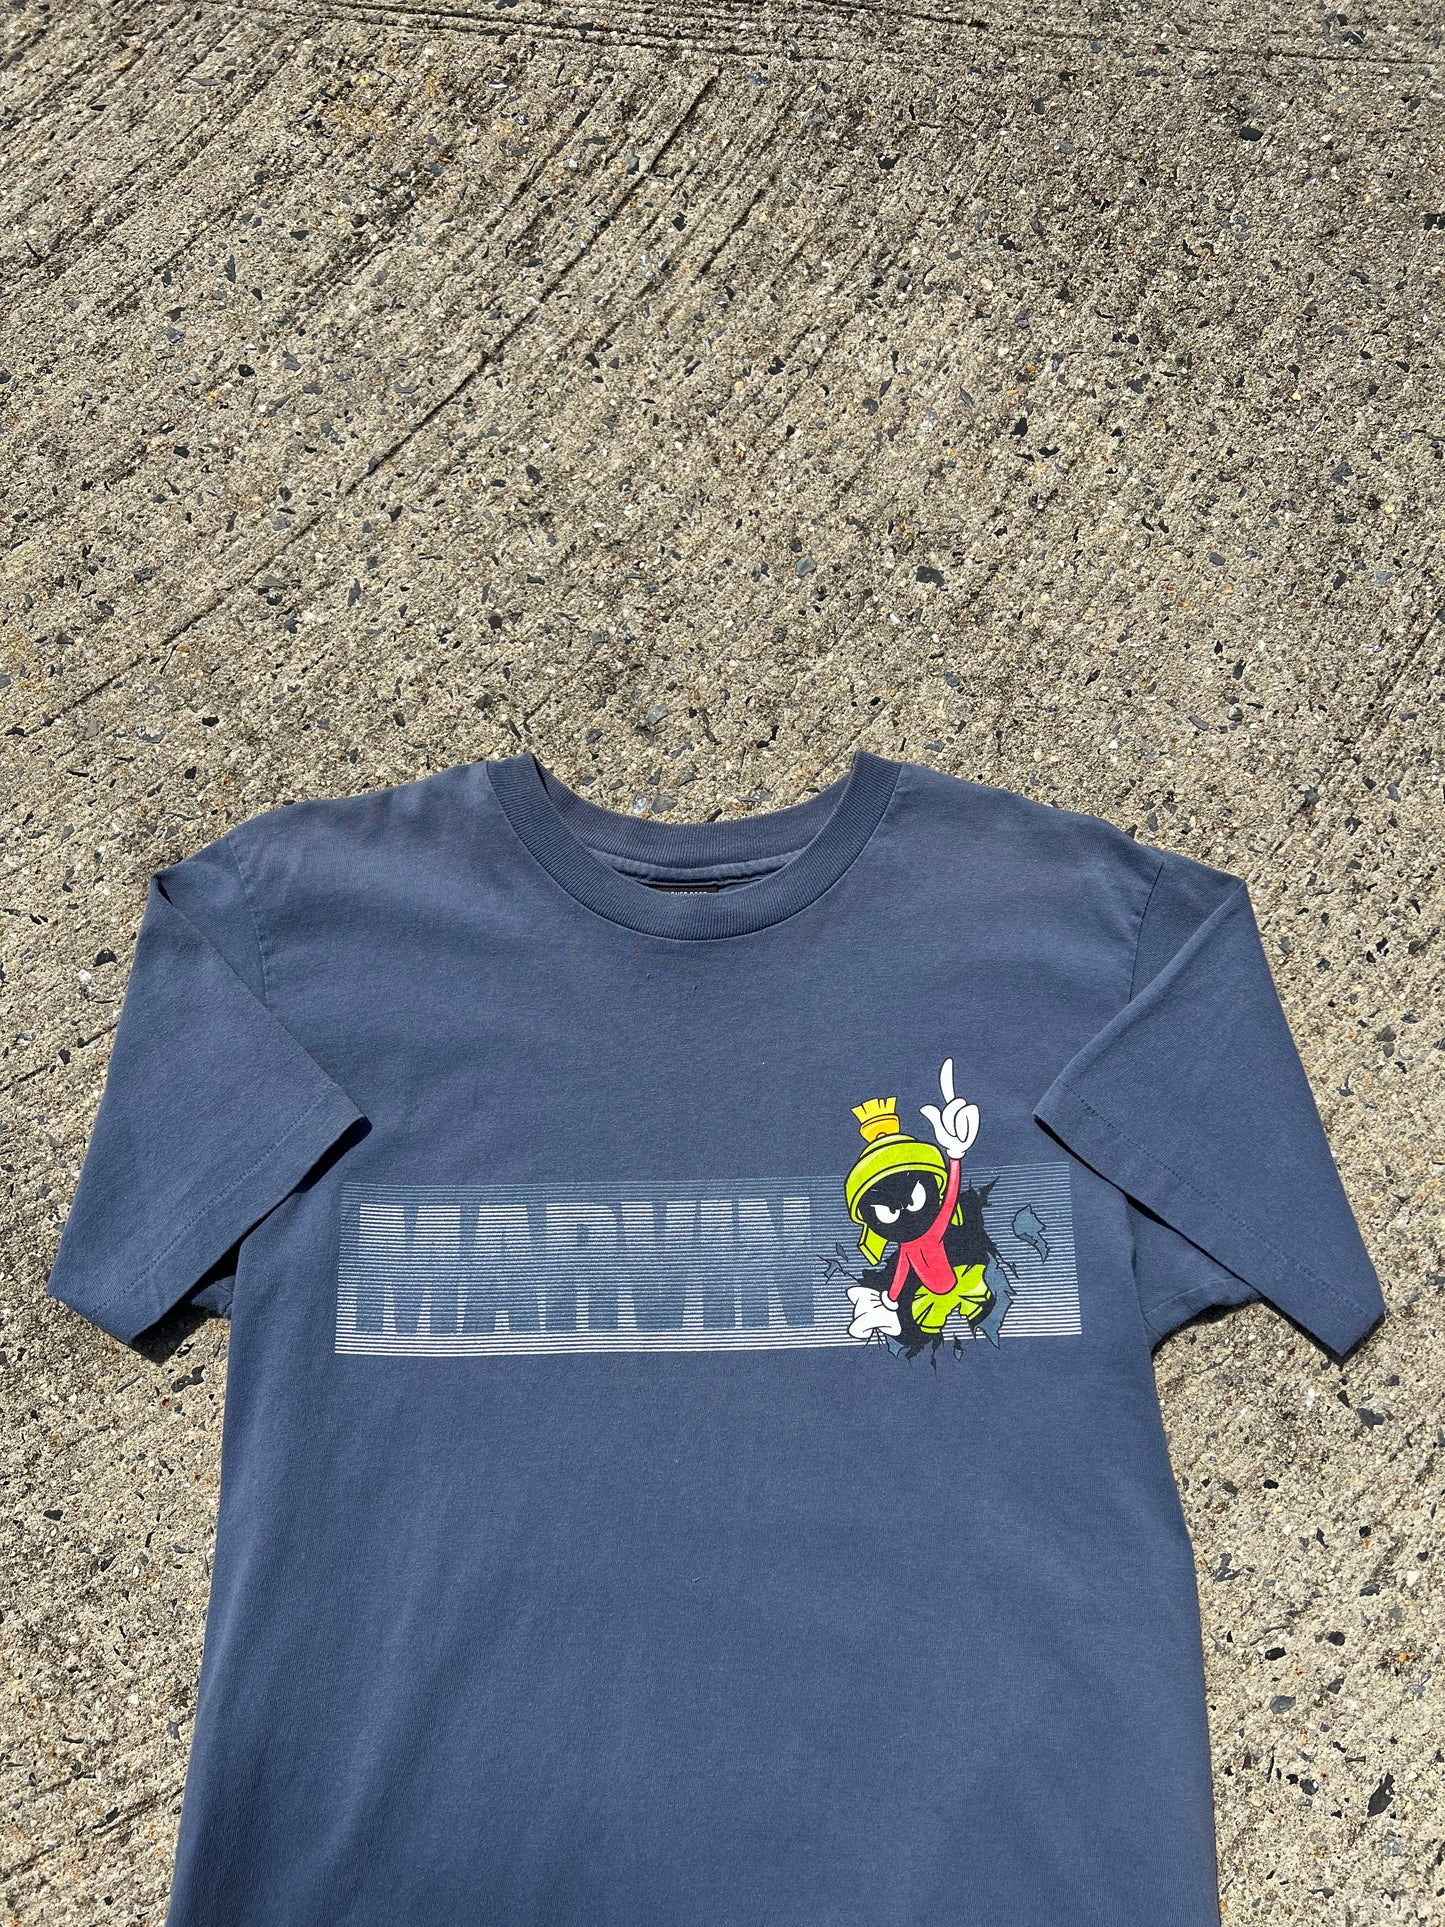 Vintage '98 Looney Tunes Marvin the Martian T Shirt